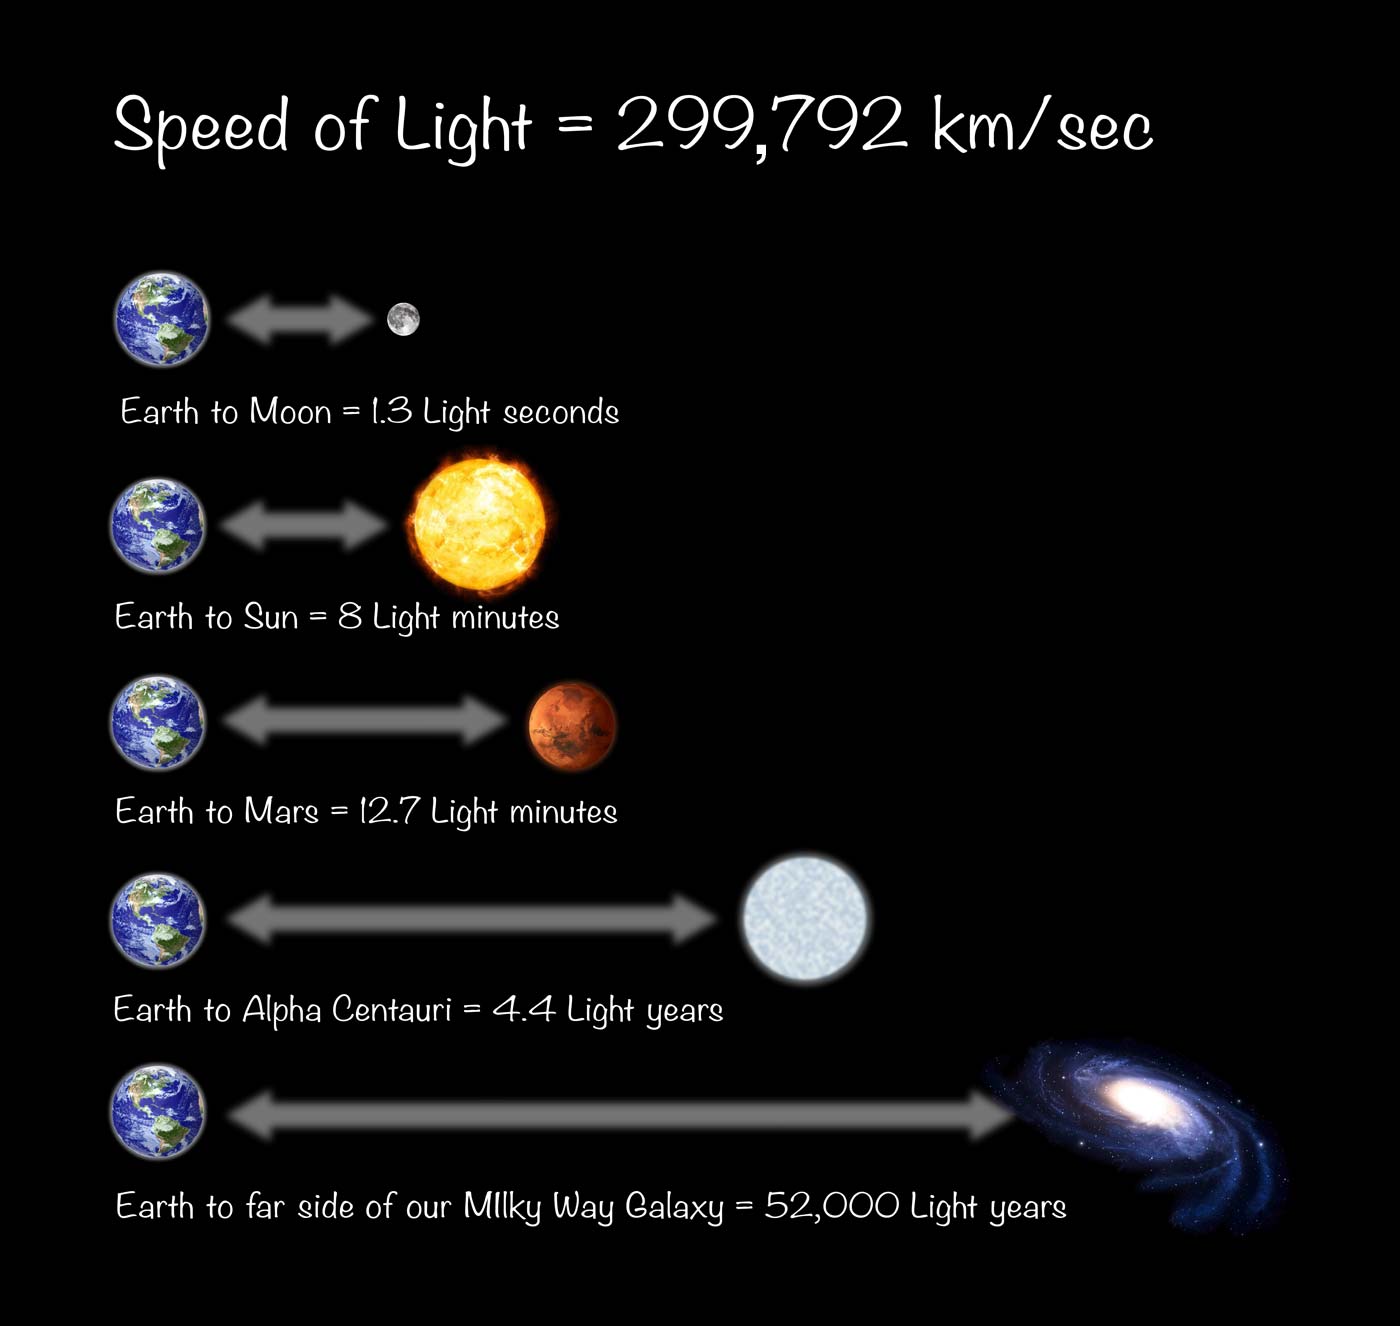 Distances from the earth in light seconds, light minutes and light-years